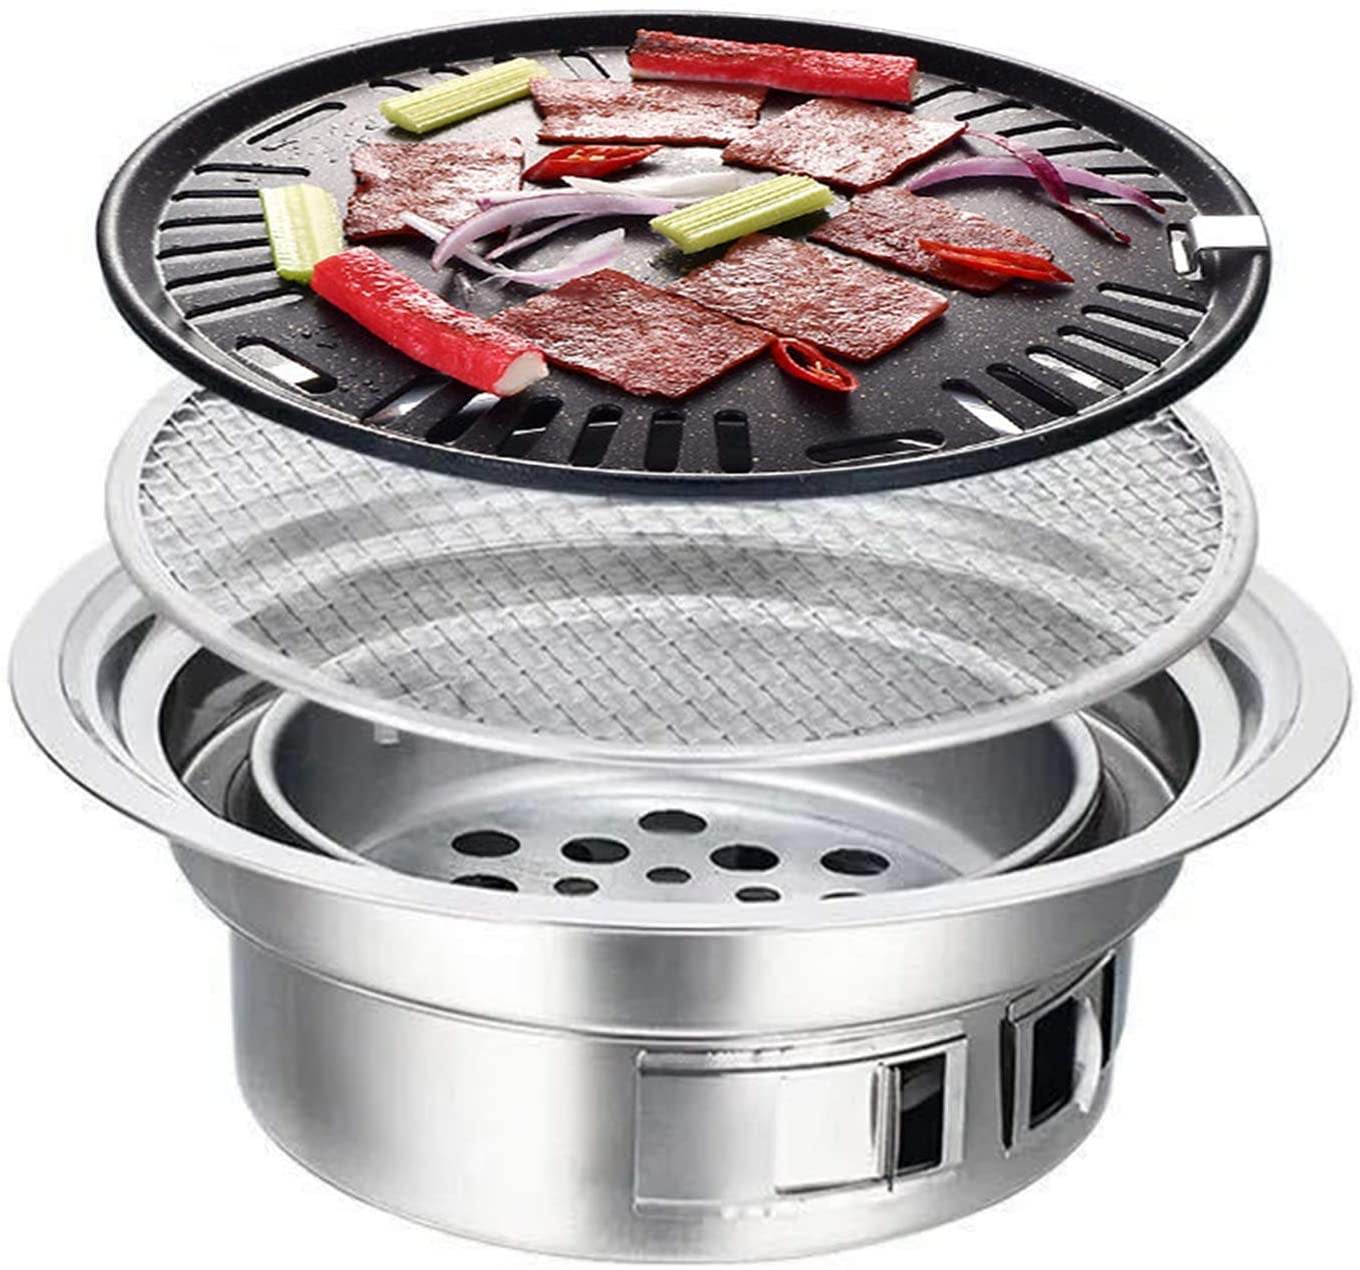 Tabletop Hibachi Grill Shipping is Free 21st Century 